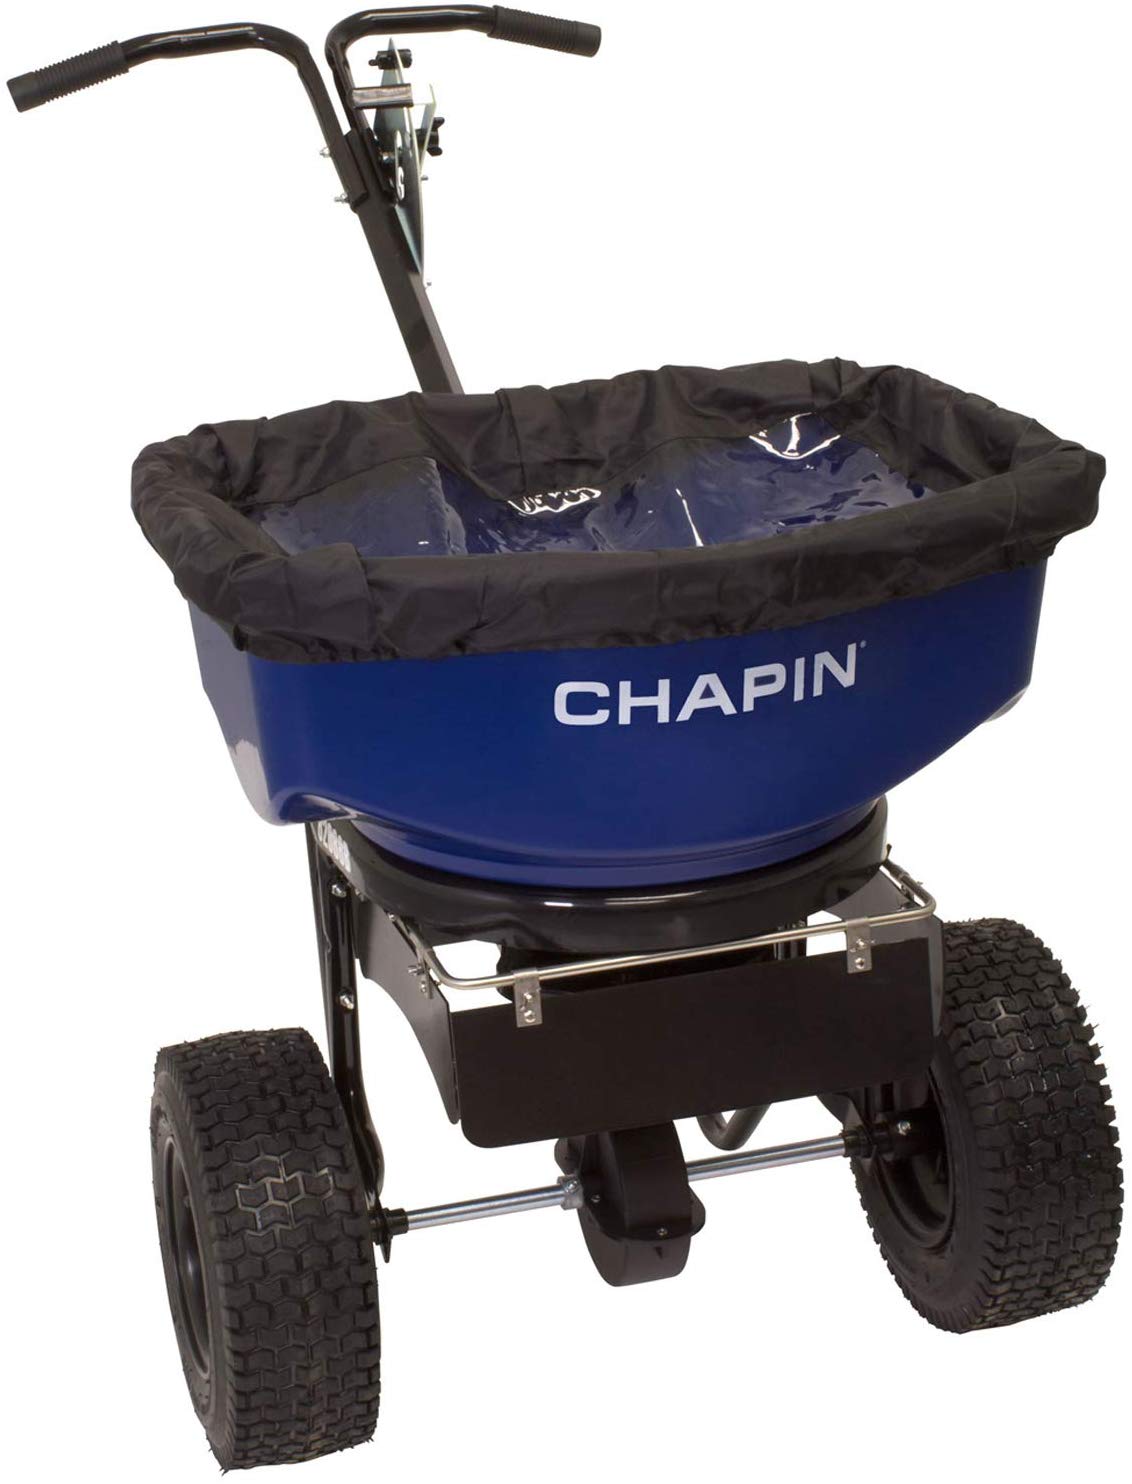 Chapin 82088 80-Pound Professional Sure Spread Salt and Ice Melt Spreader with Baffles, (1 Spreader/Package)